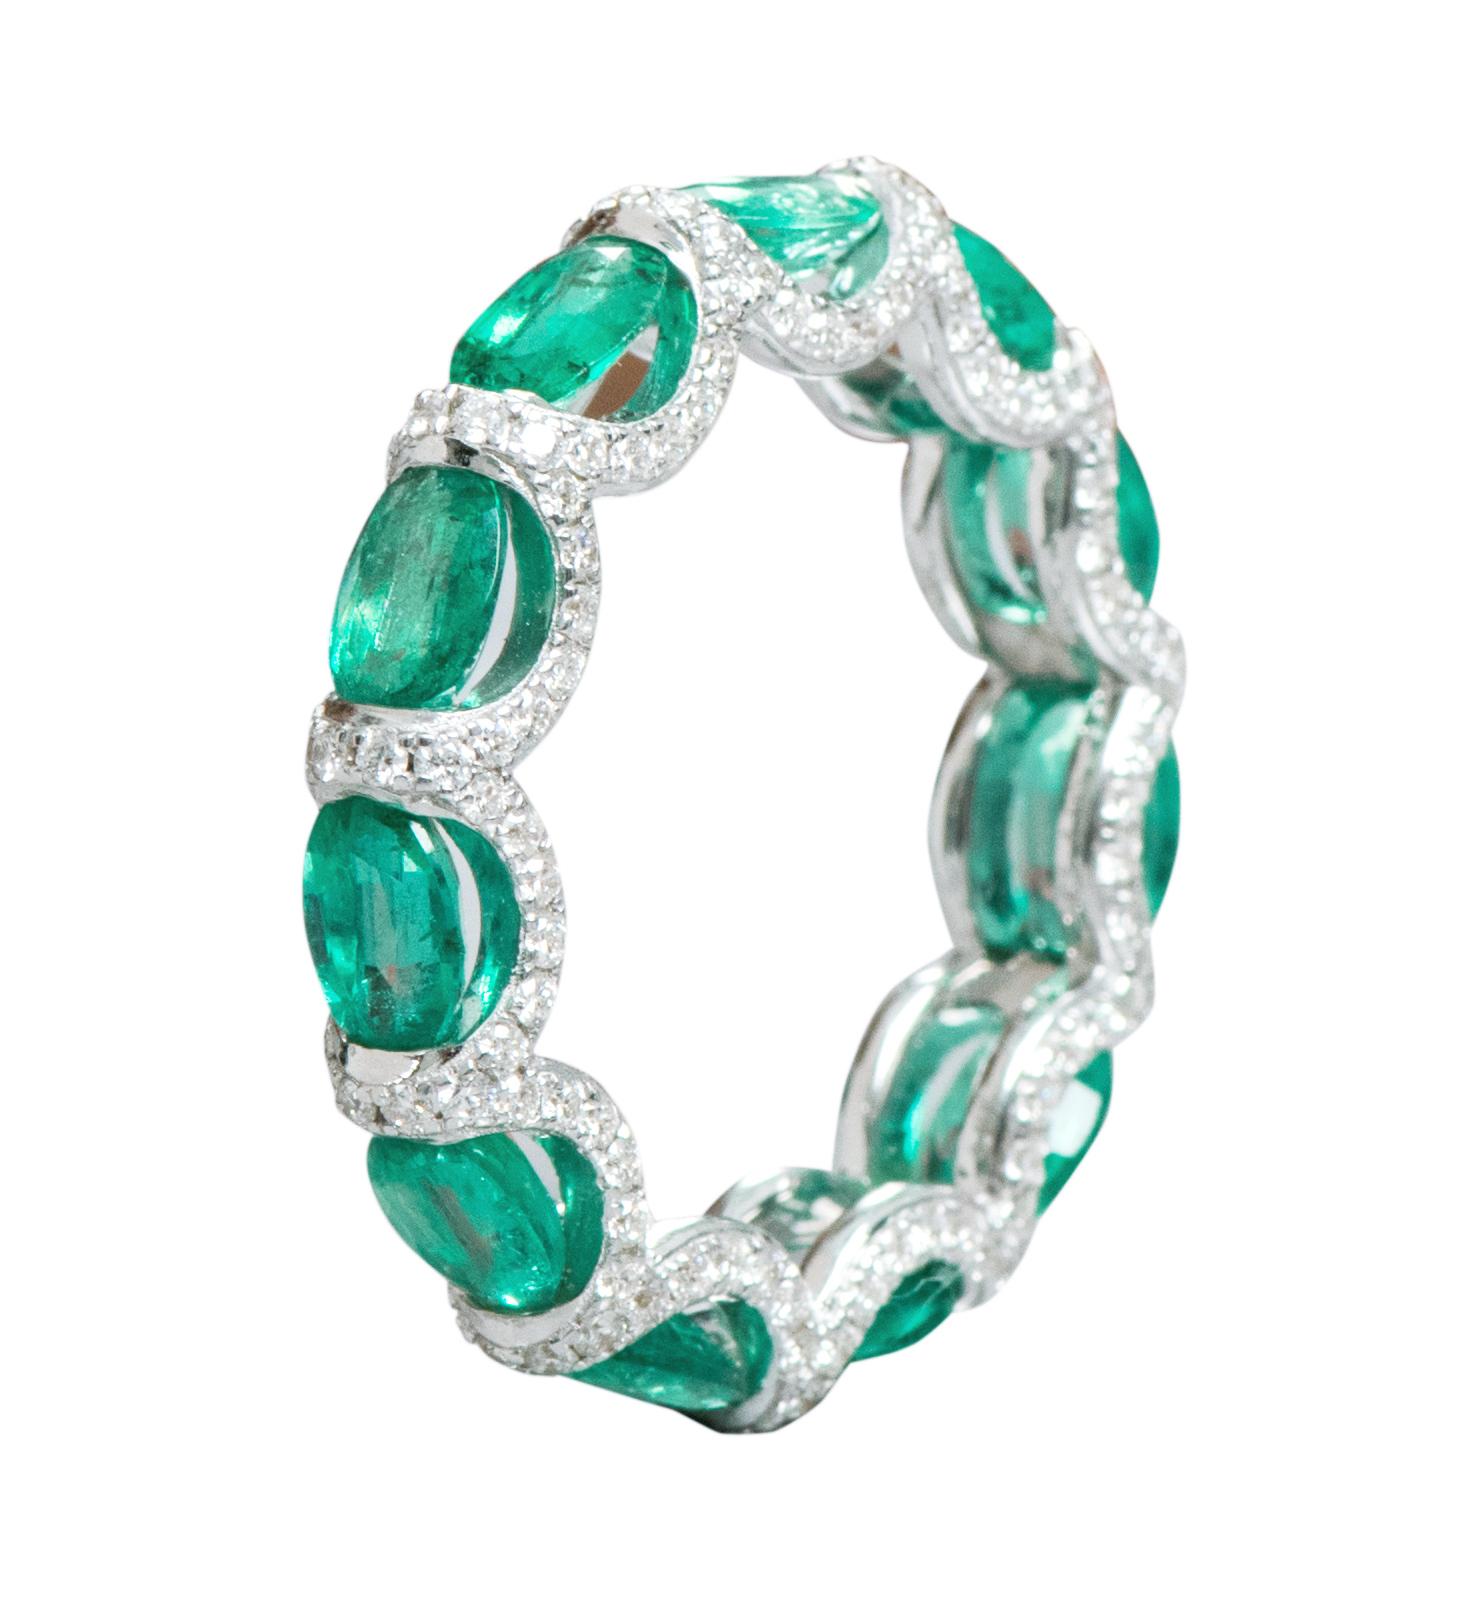 Contemporary 18 Karat White Gold 5.11 Carat Natural Emerald and Diamond Eternity Band Ring For Sale